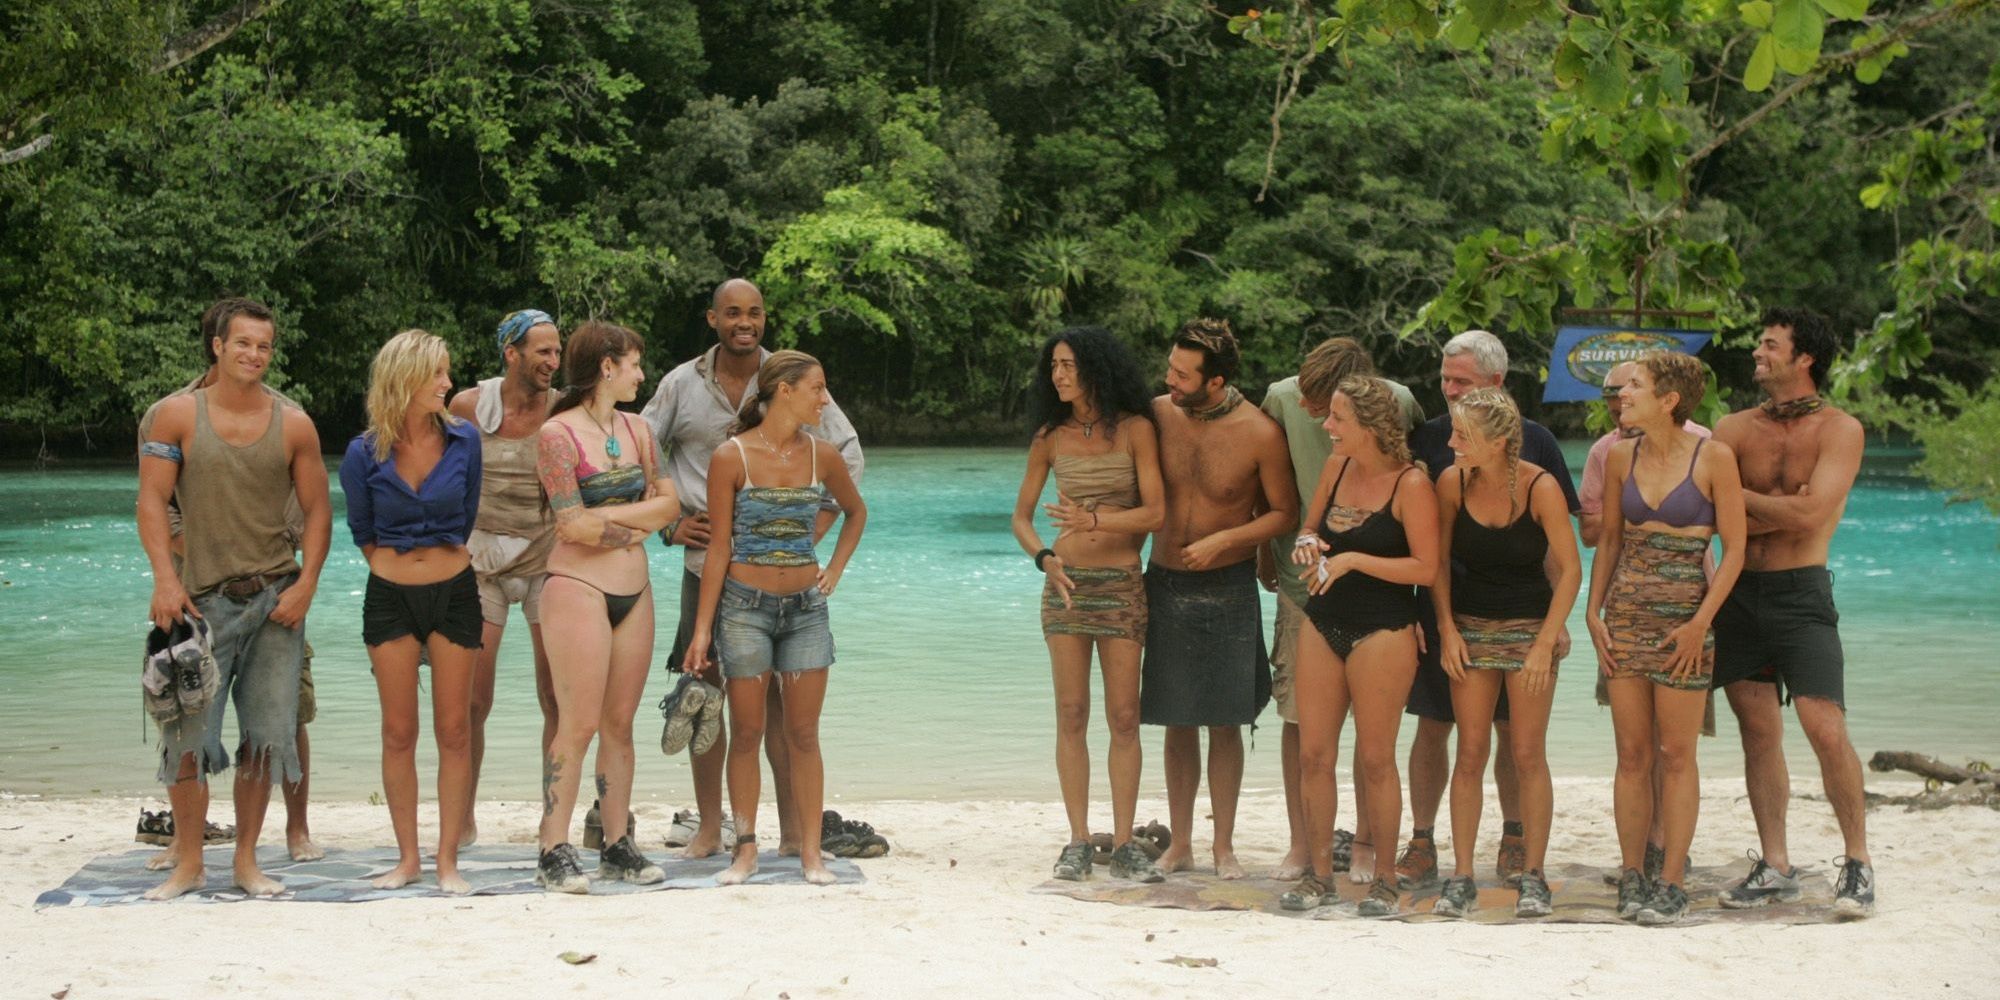 Two teams stand around on a beach in Survivor.